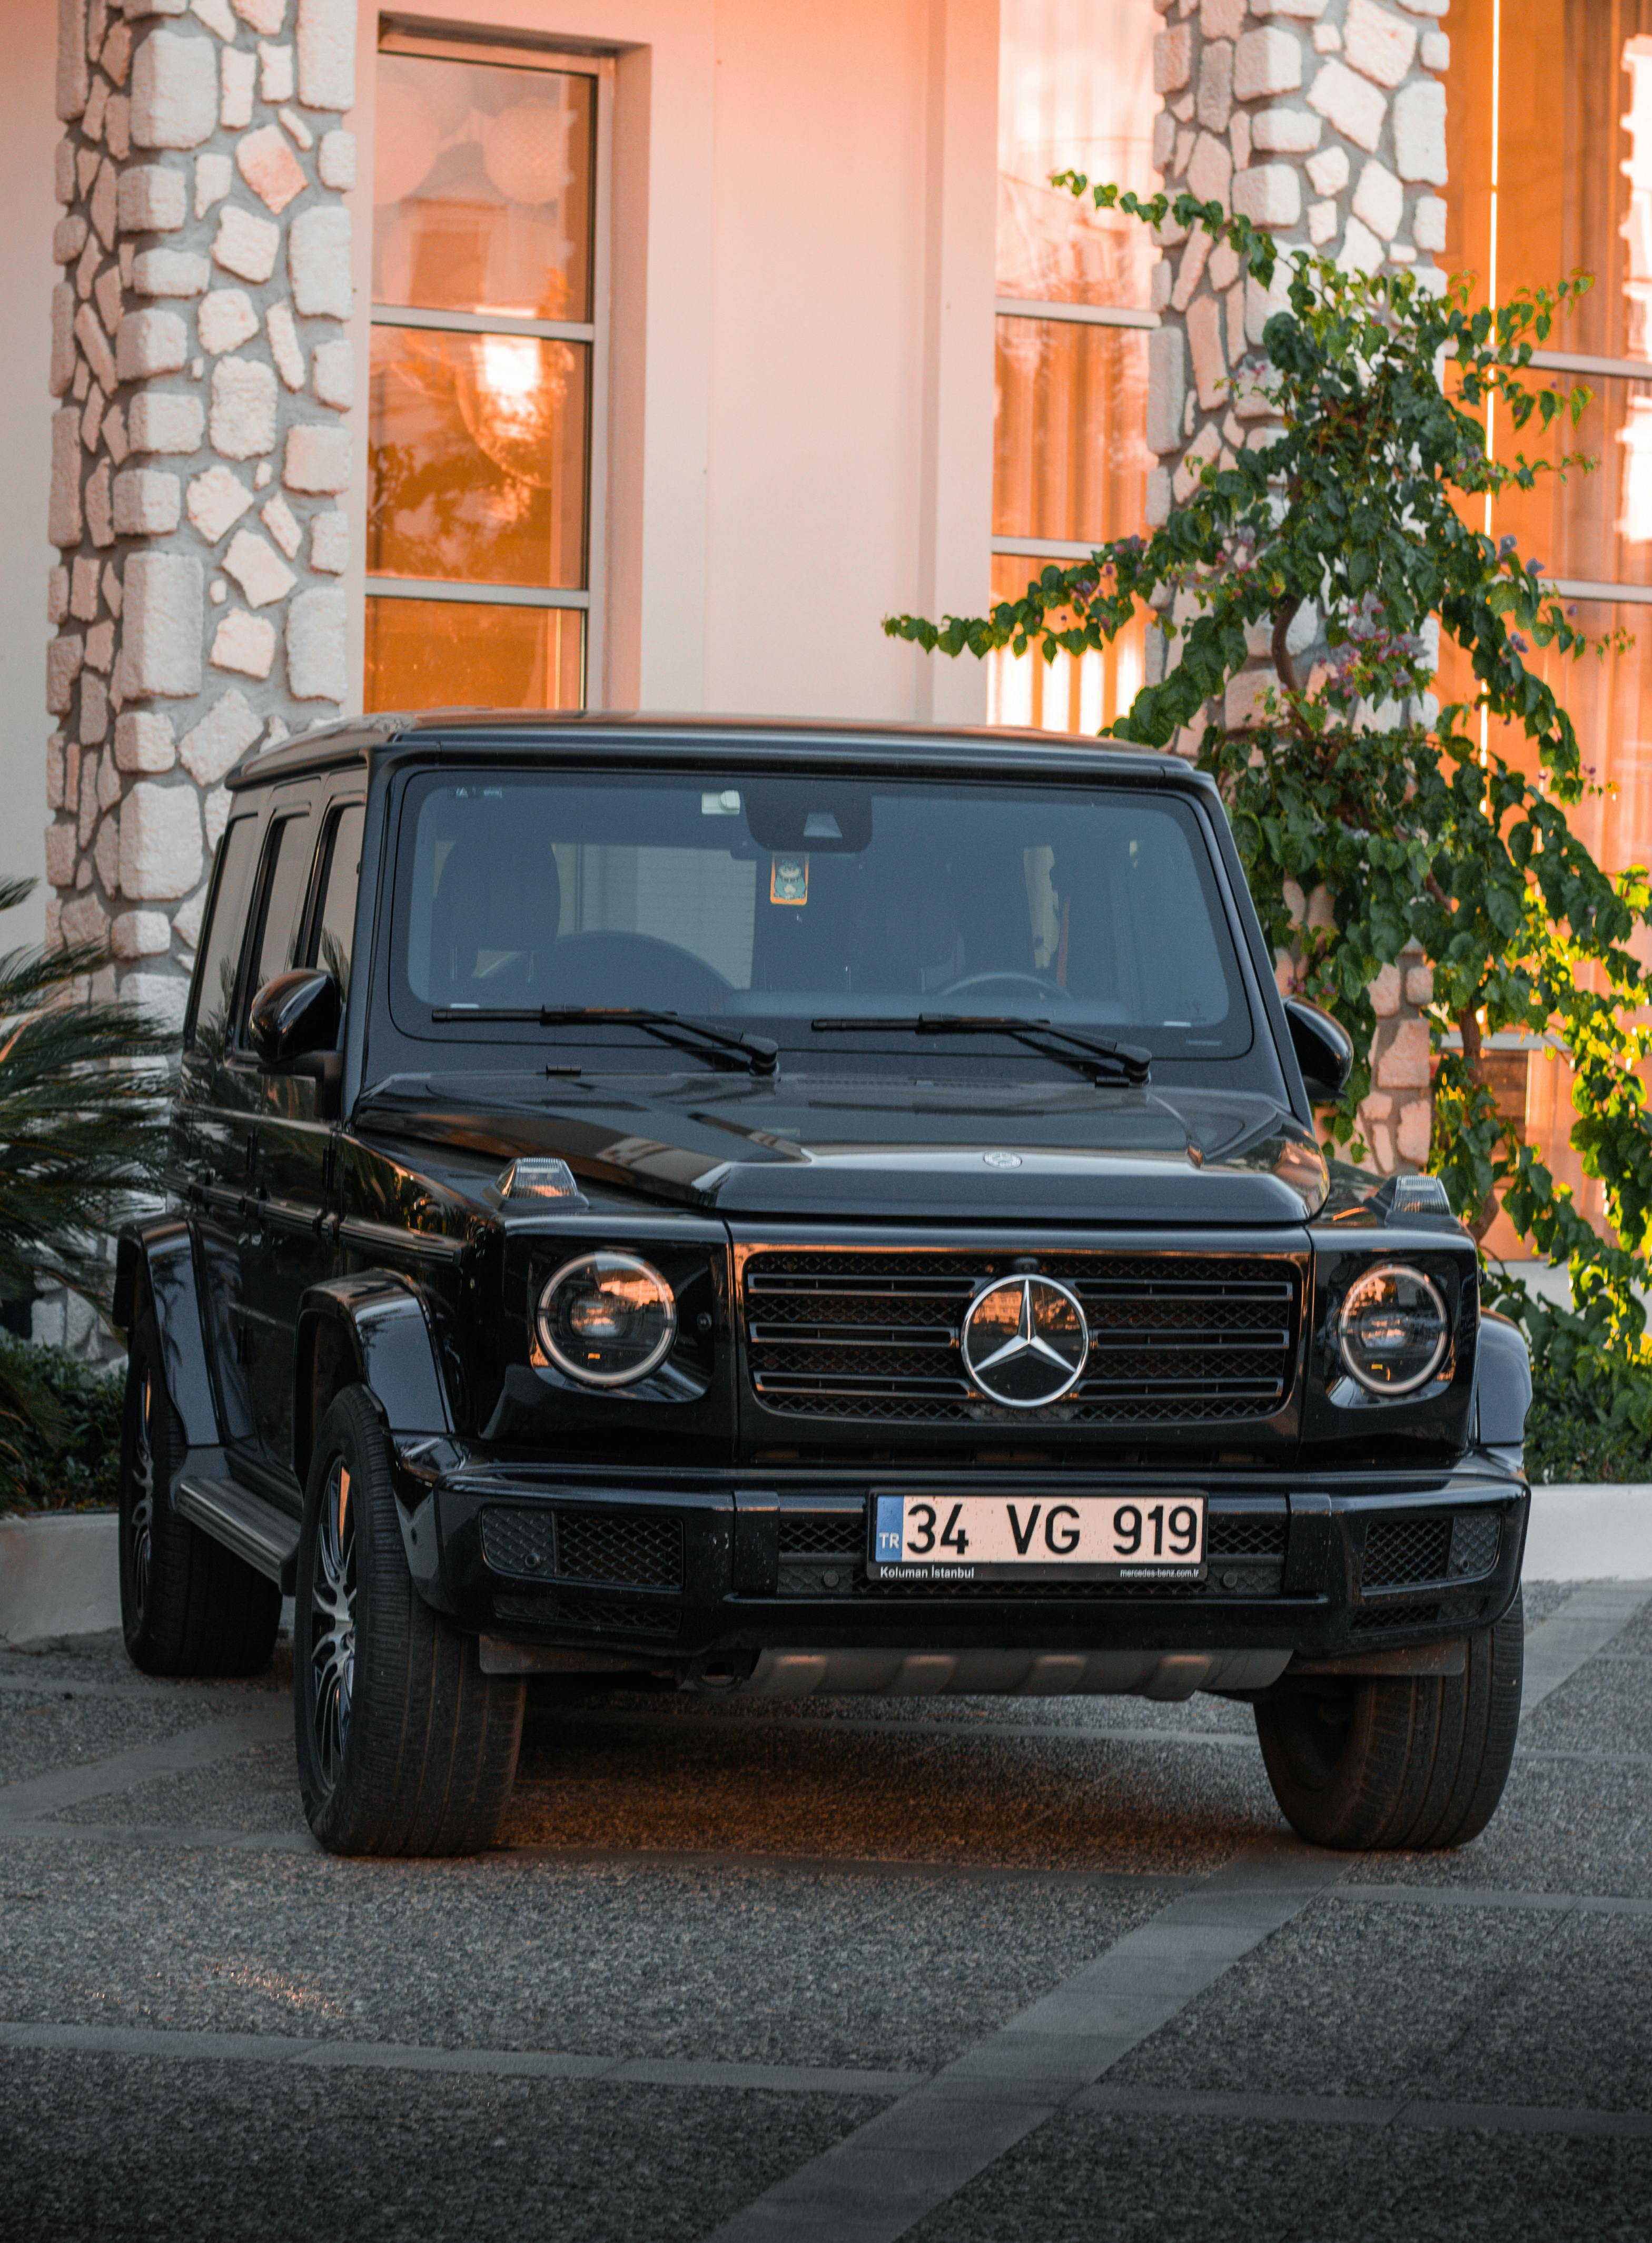 G Wagon Photos, Download The BEST Free G Wagon Stock Photos & HD Images